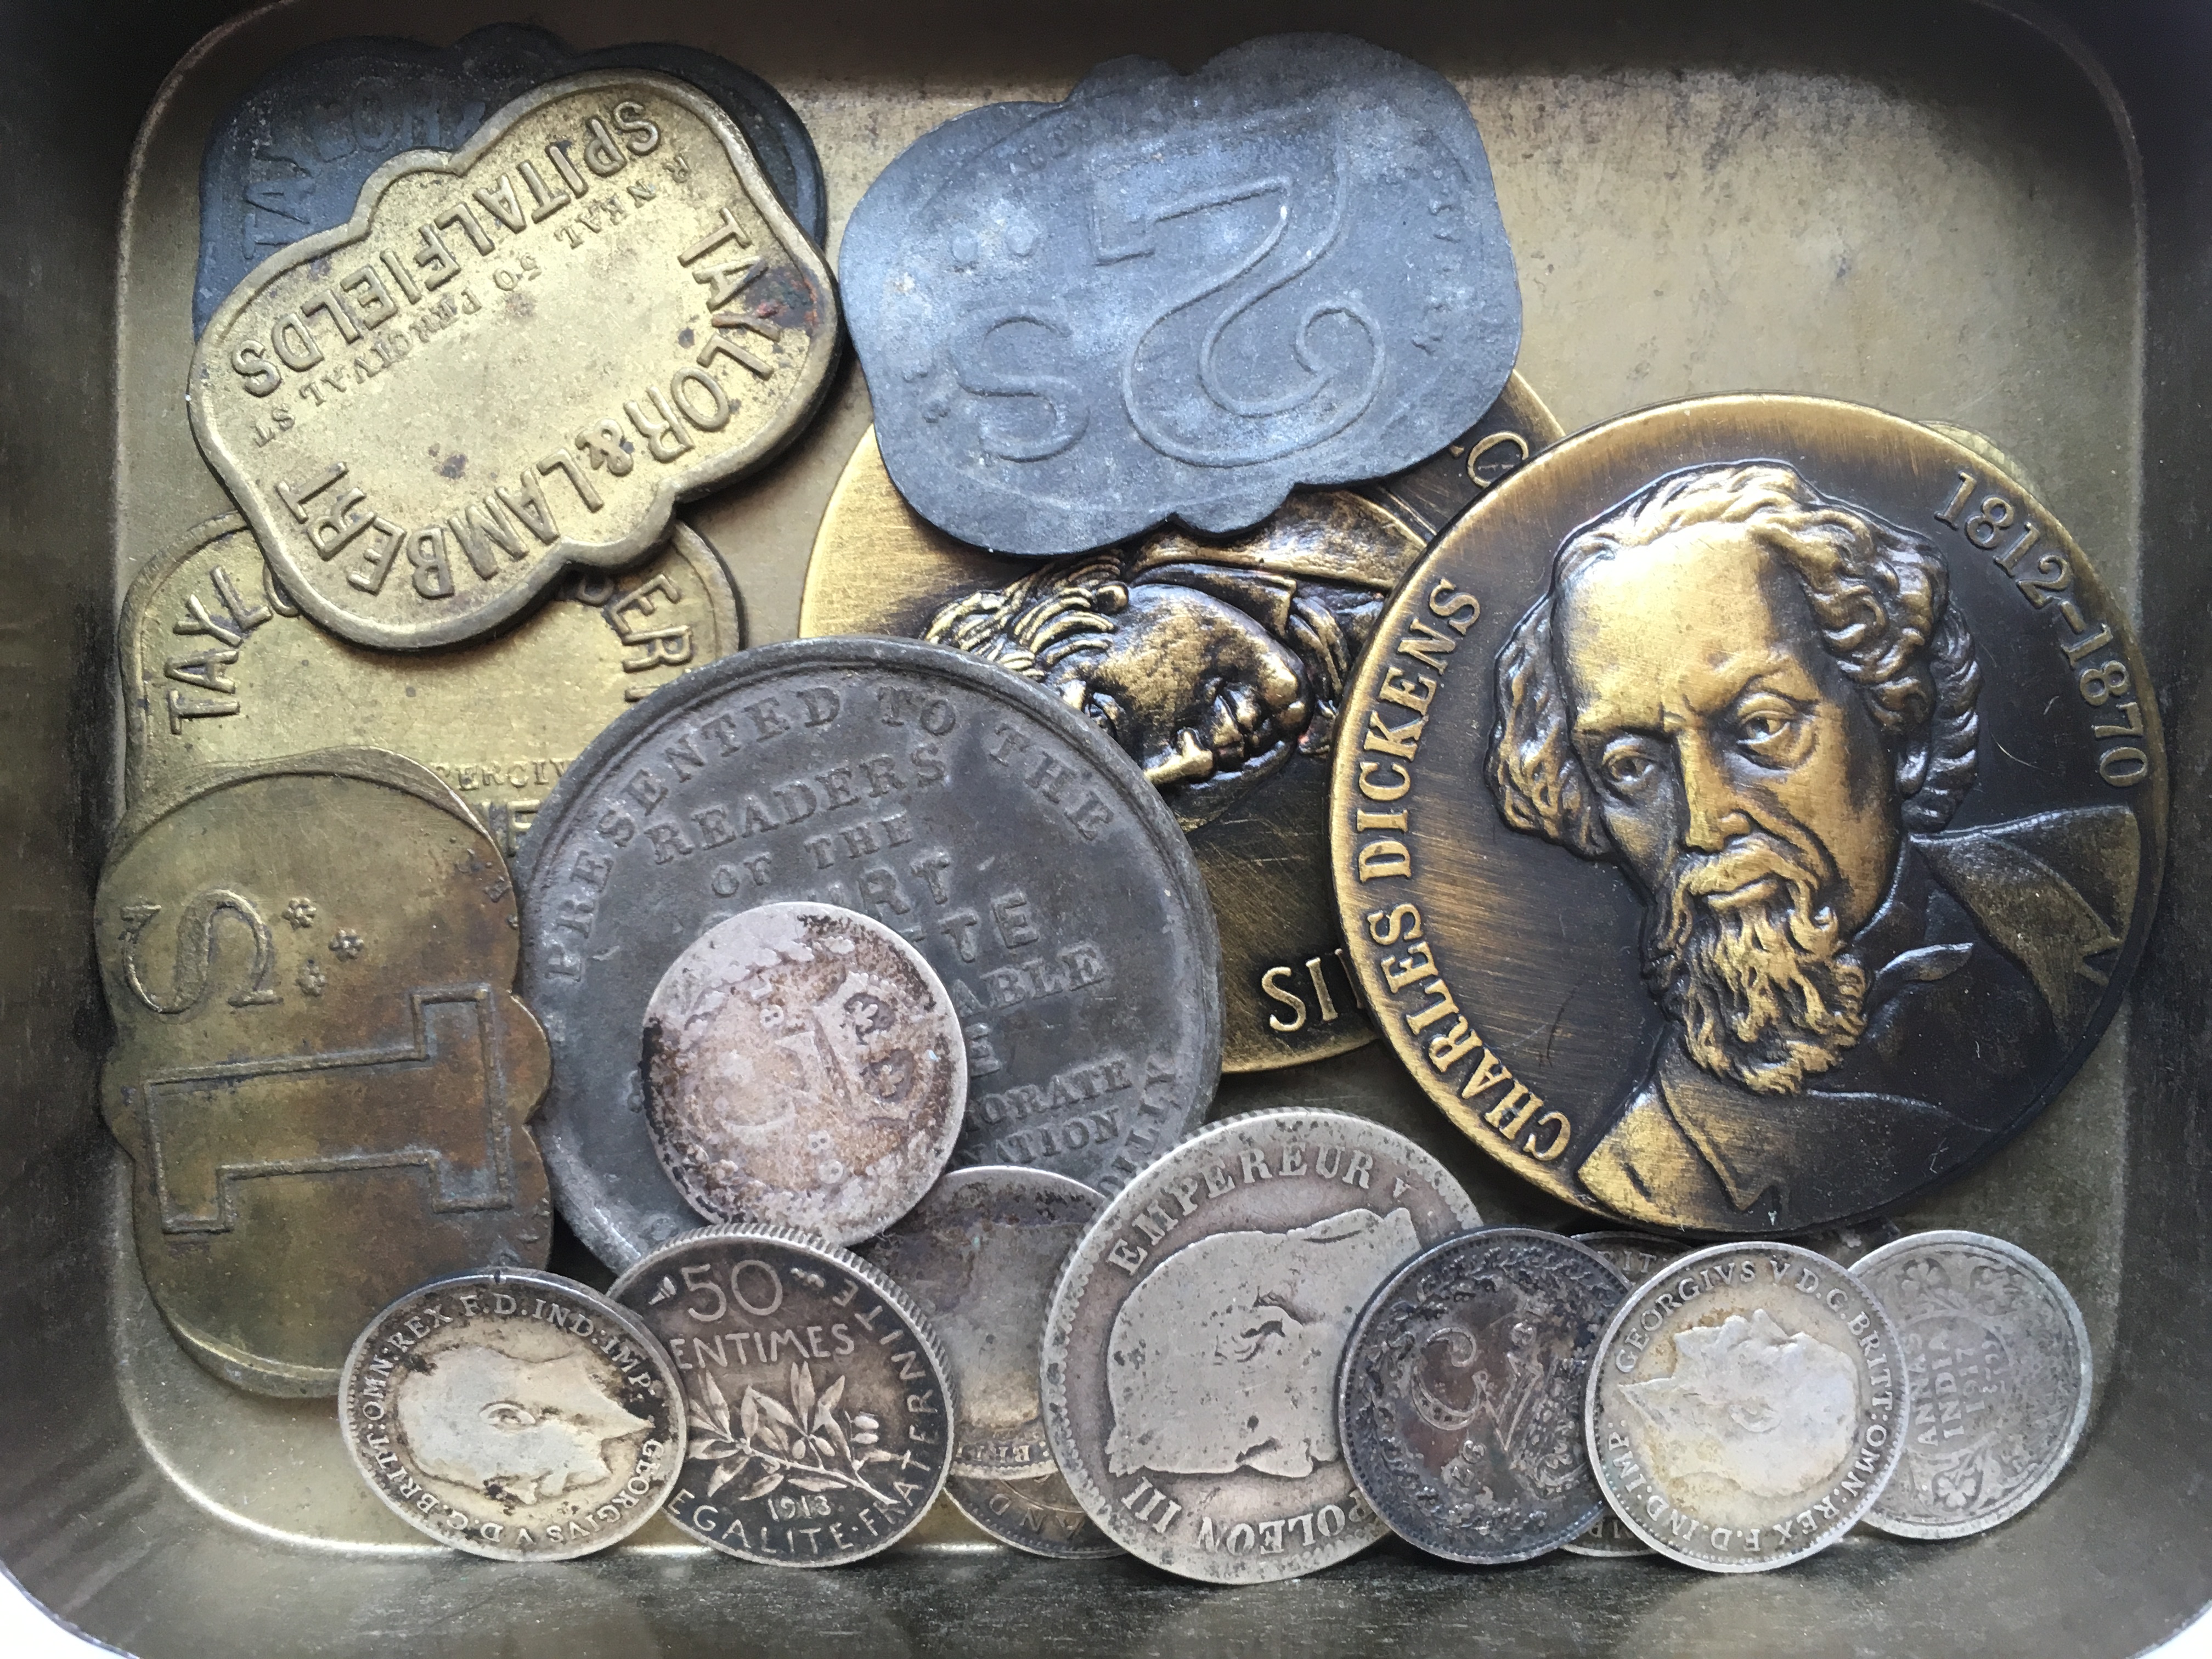 COINS: TUB OF MIXED MAINLY UK WITH 1797 CARTWHEEL TWOPENCE, A FEW SILVER, BRASS THREEPENCE 1937, - Image 5 of 9